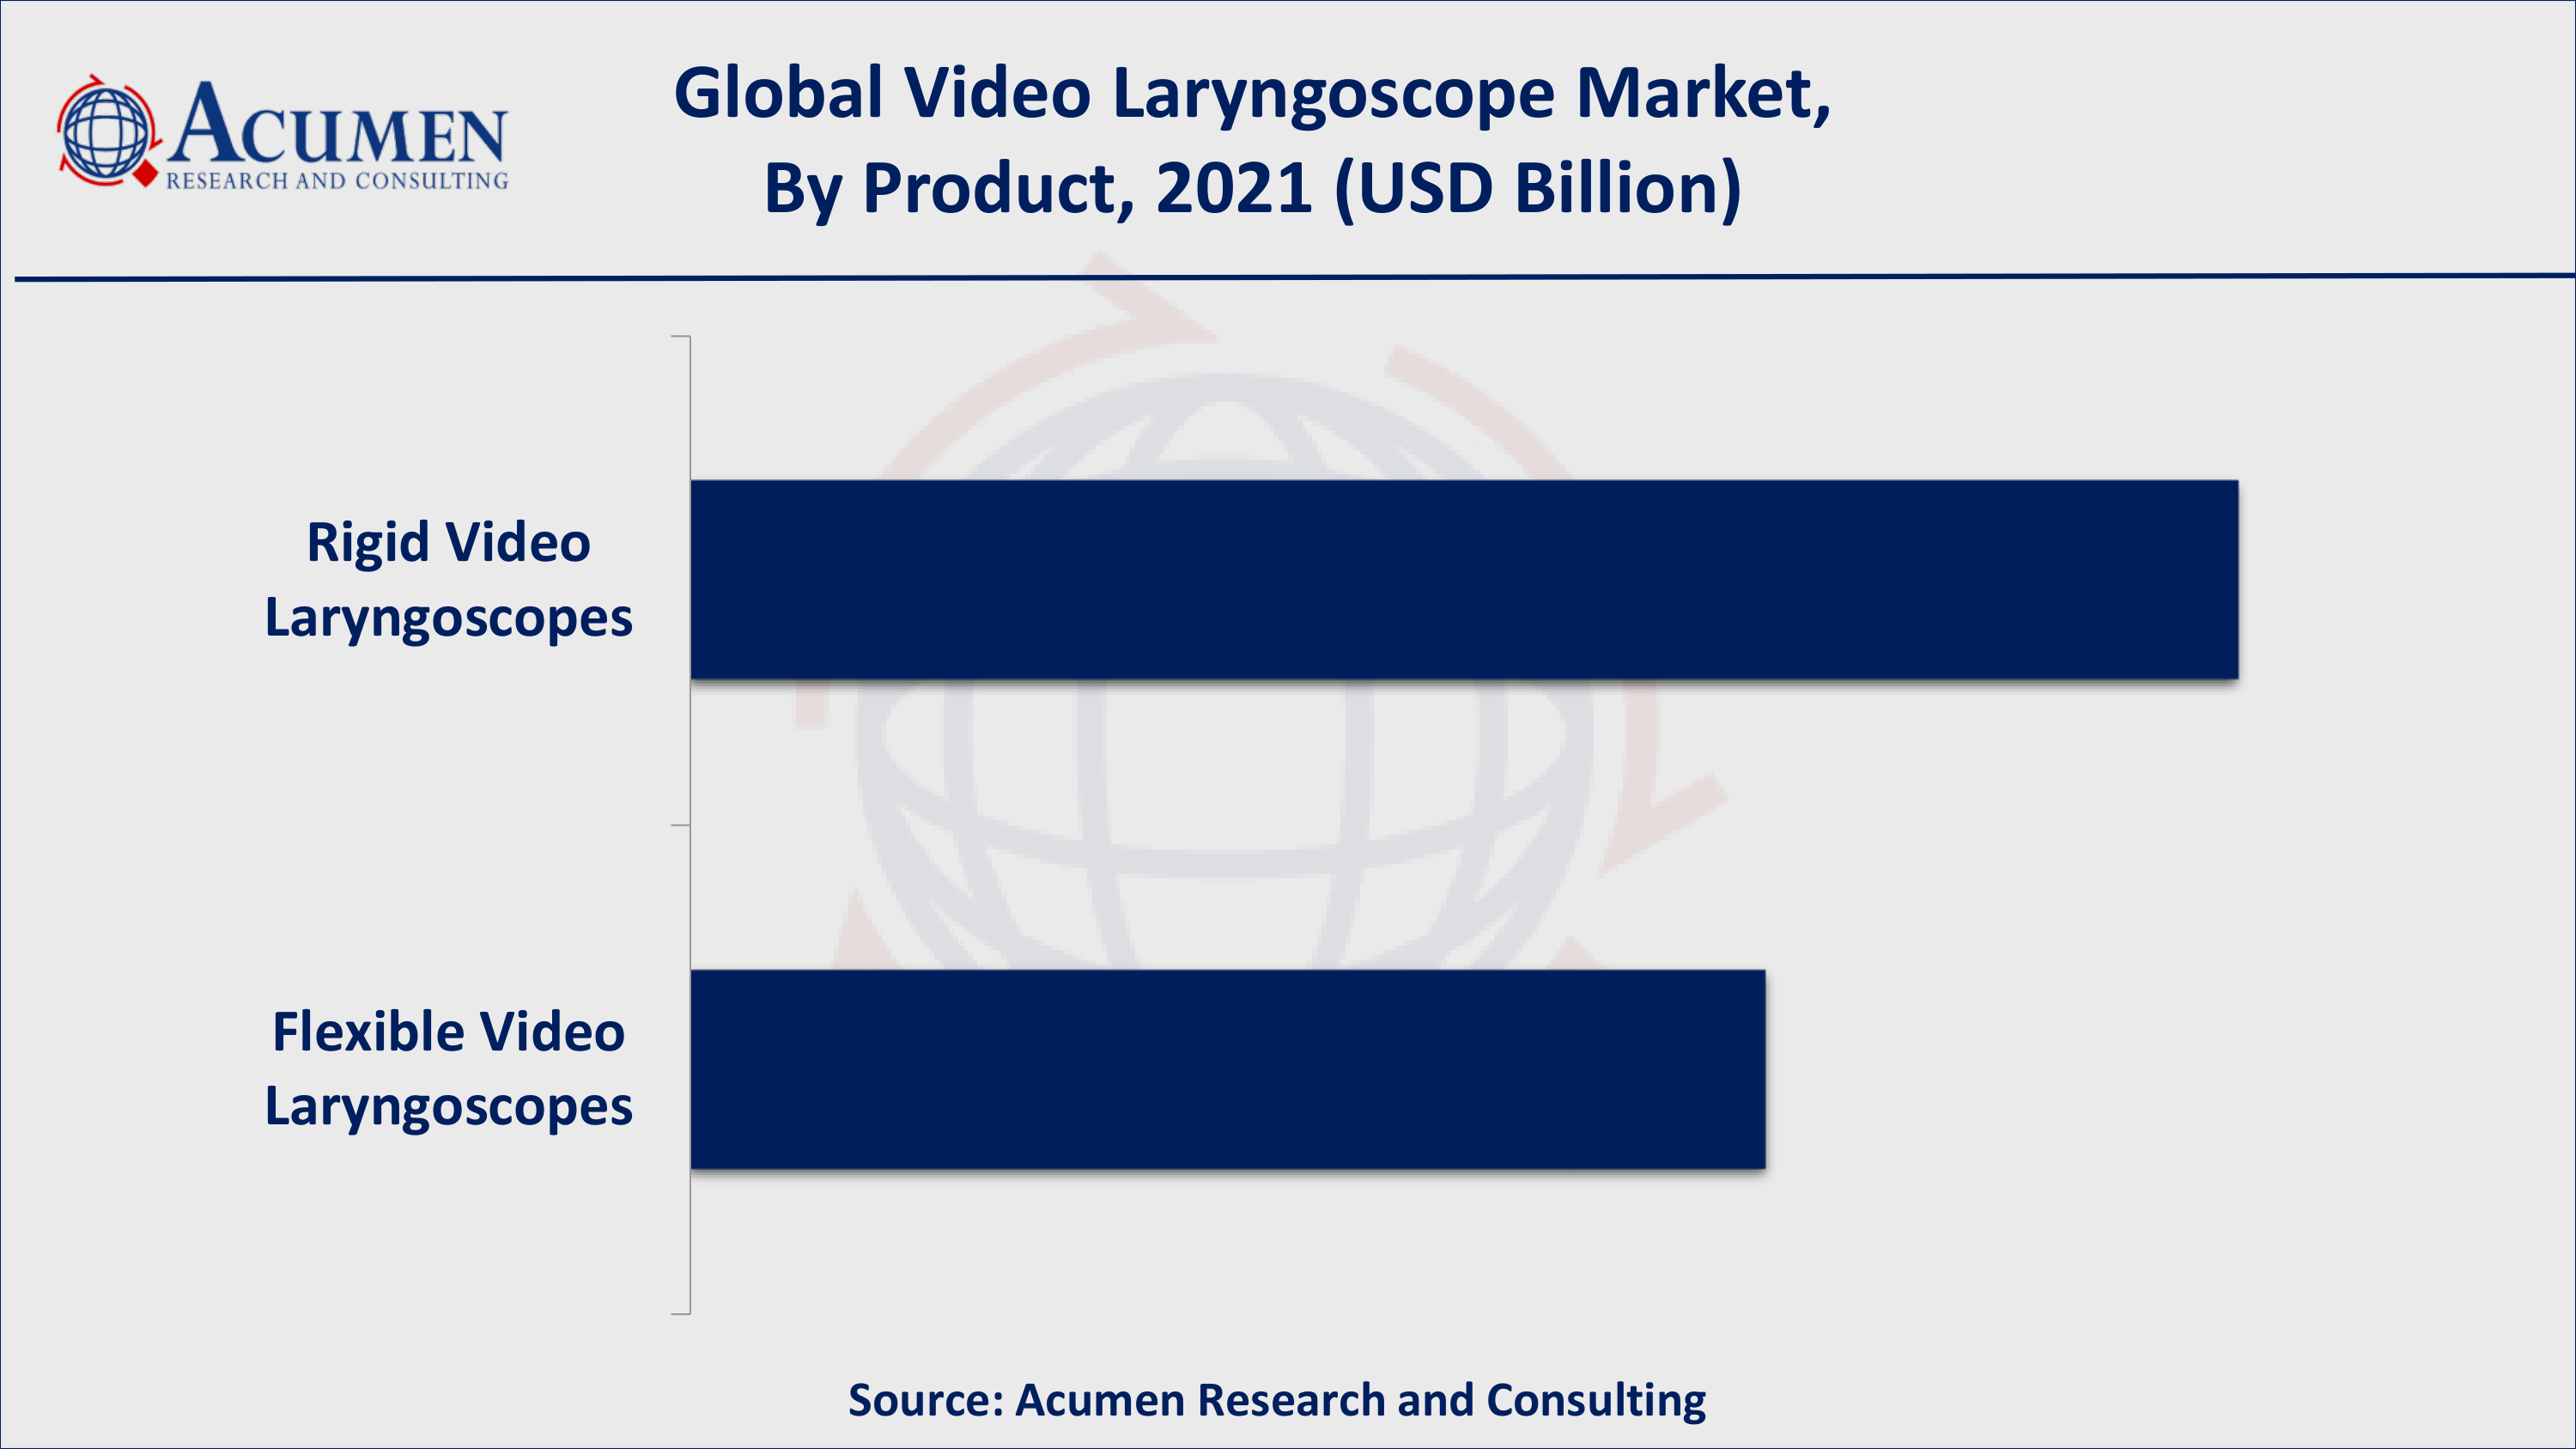 Based on product, rigid video laryngoscopes acquired over 59% of the overall market share in 2021